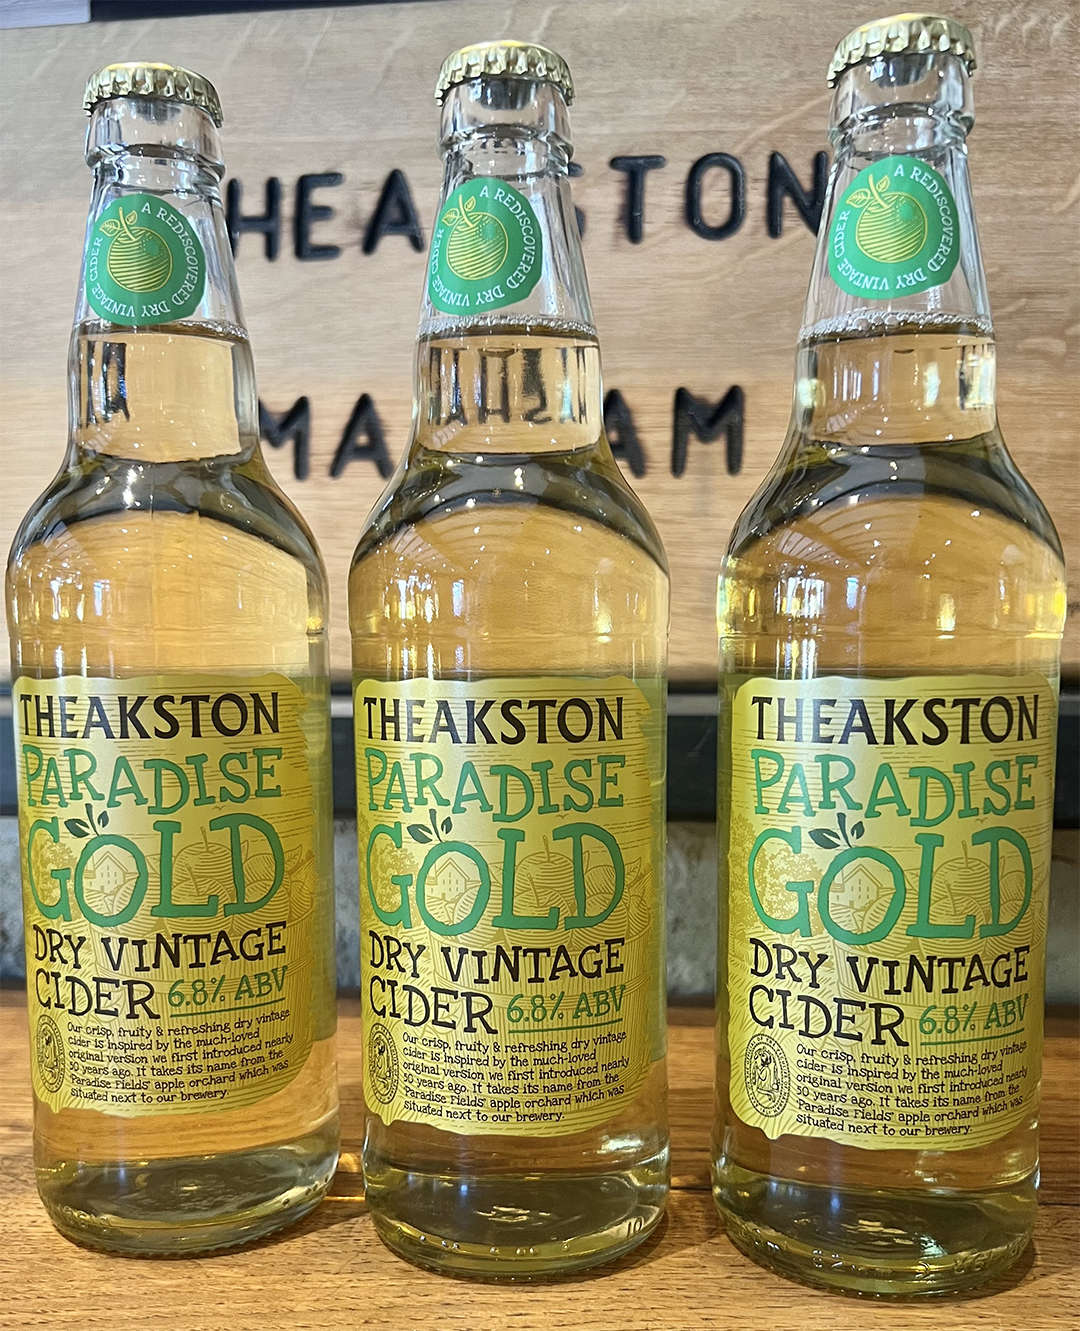 T&R Theakston has announced the launch of Theakston Paradise Gold